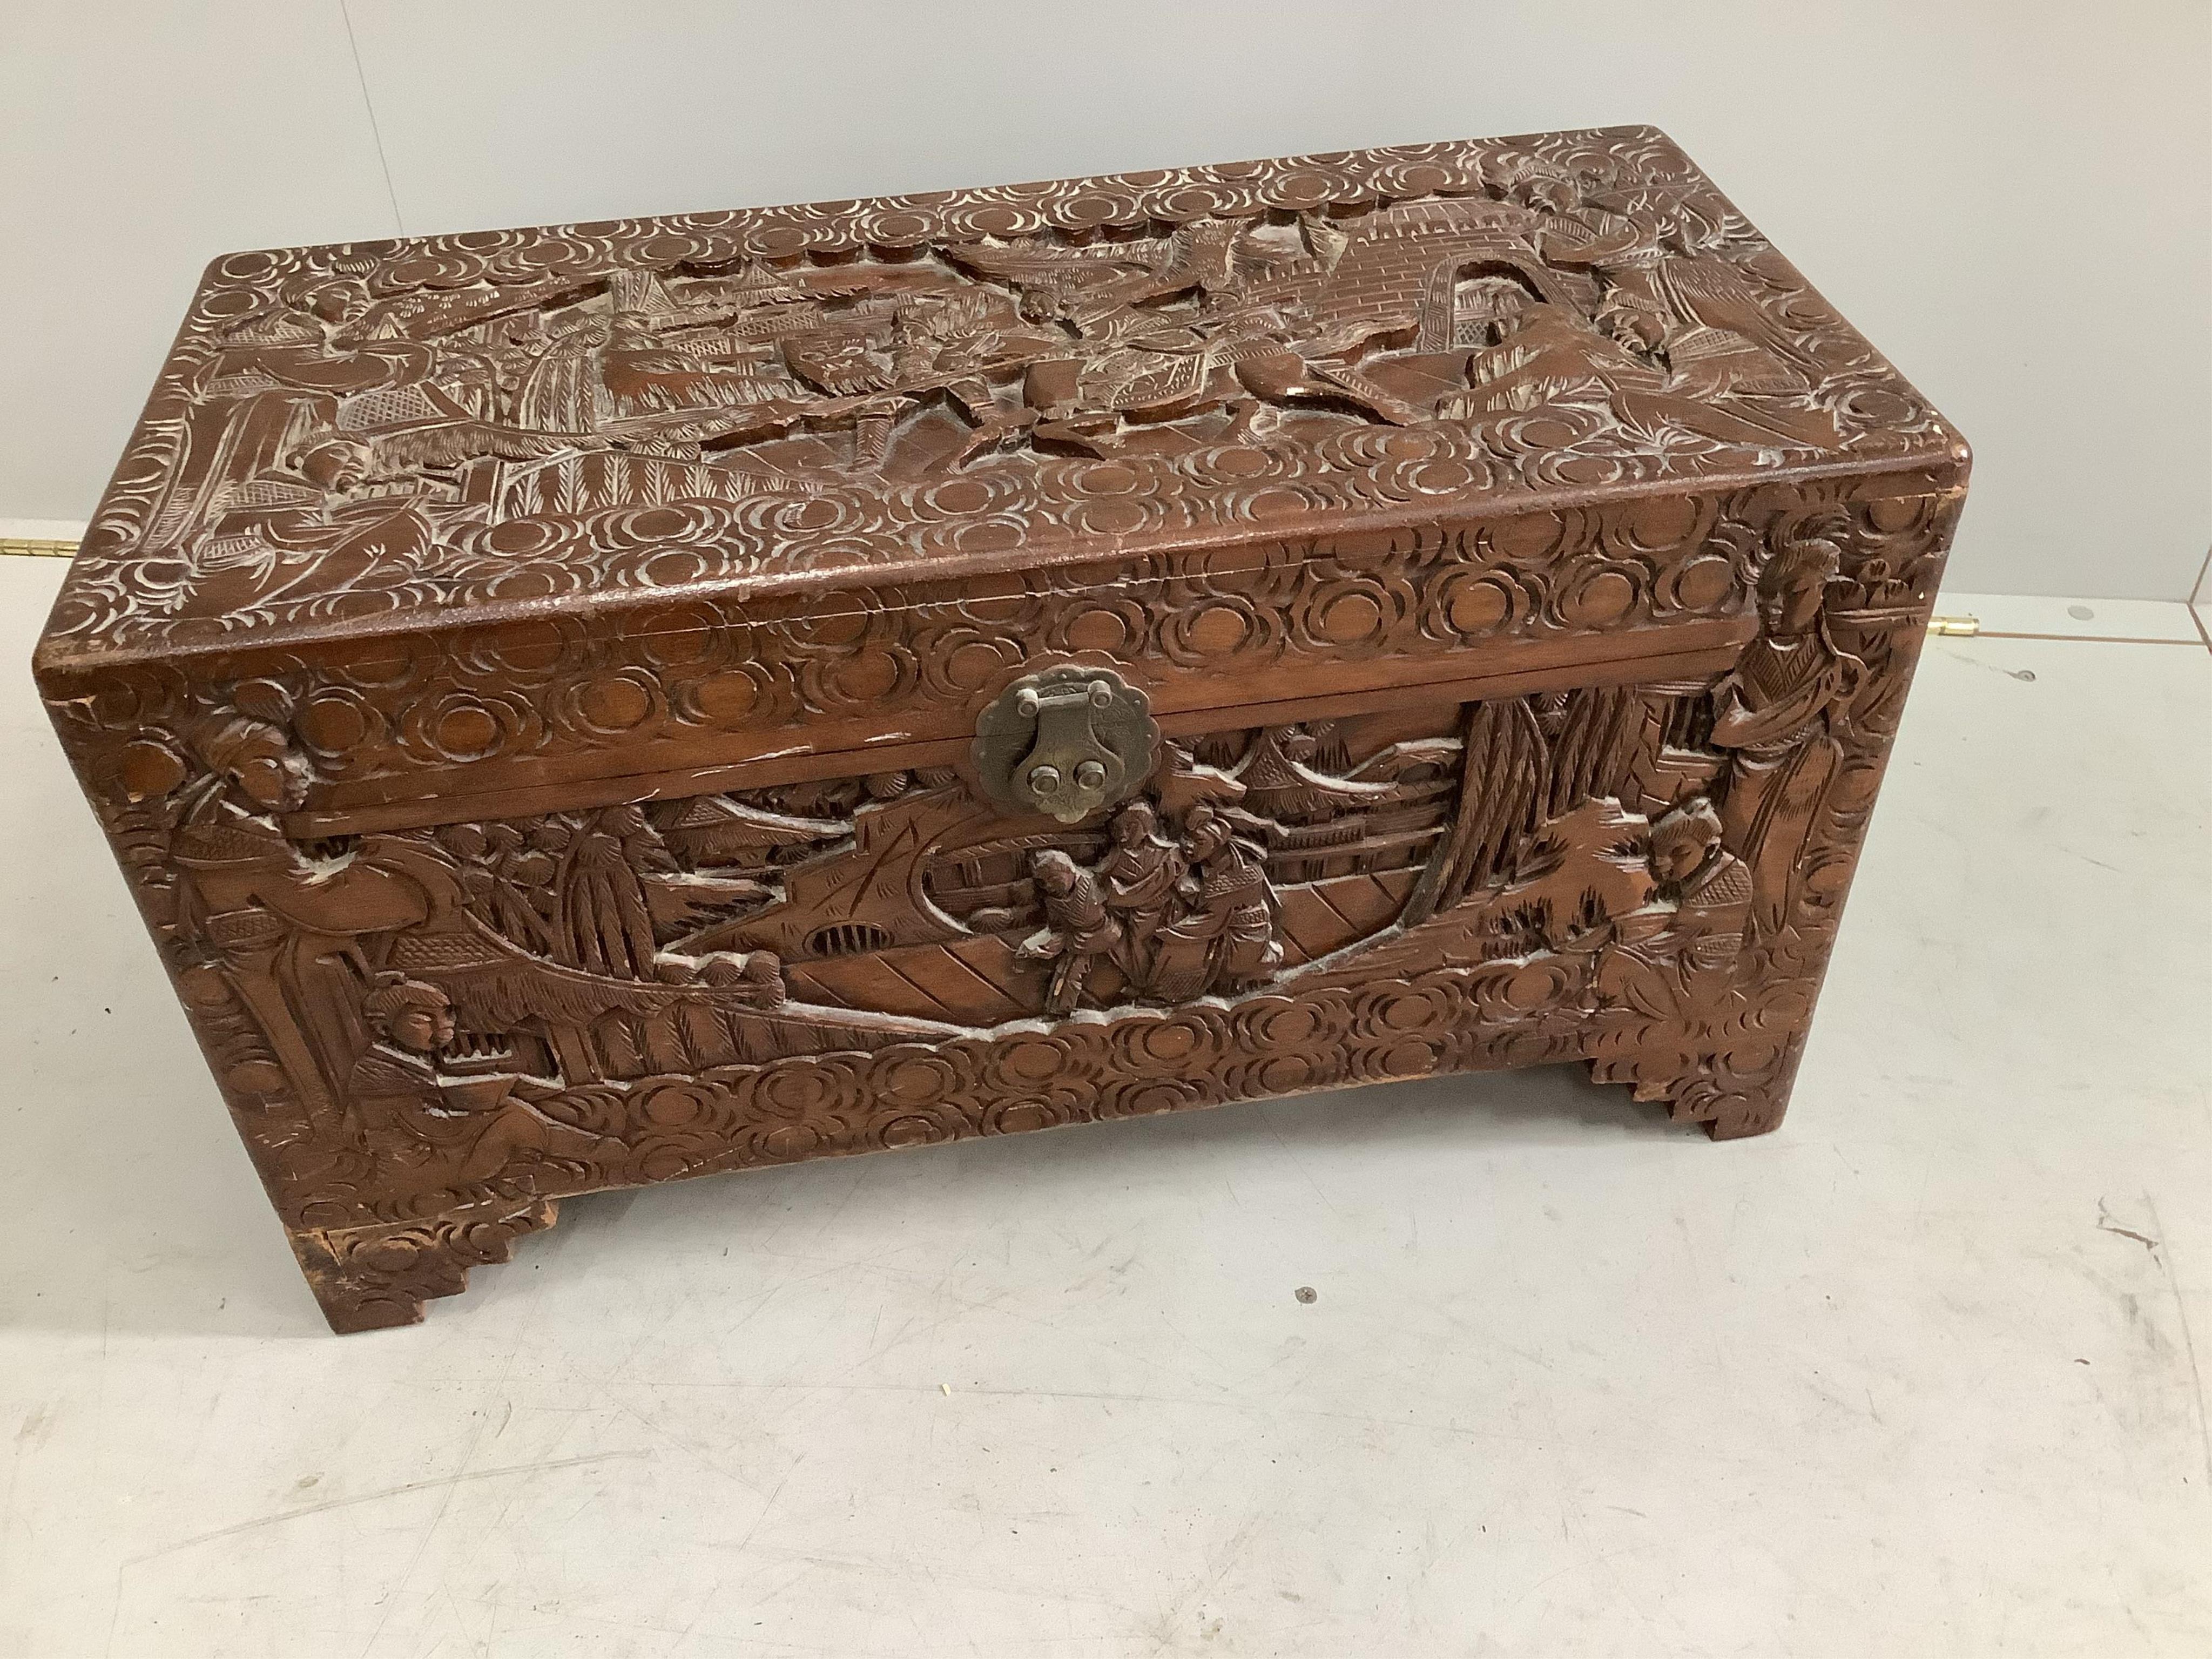 A small Chinese camphorwood trunk, width 73cm, depth 35cm, height 40cm. Condition - fair